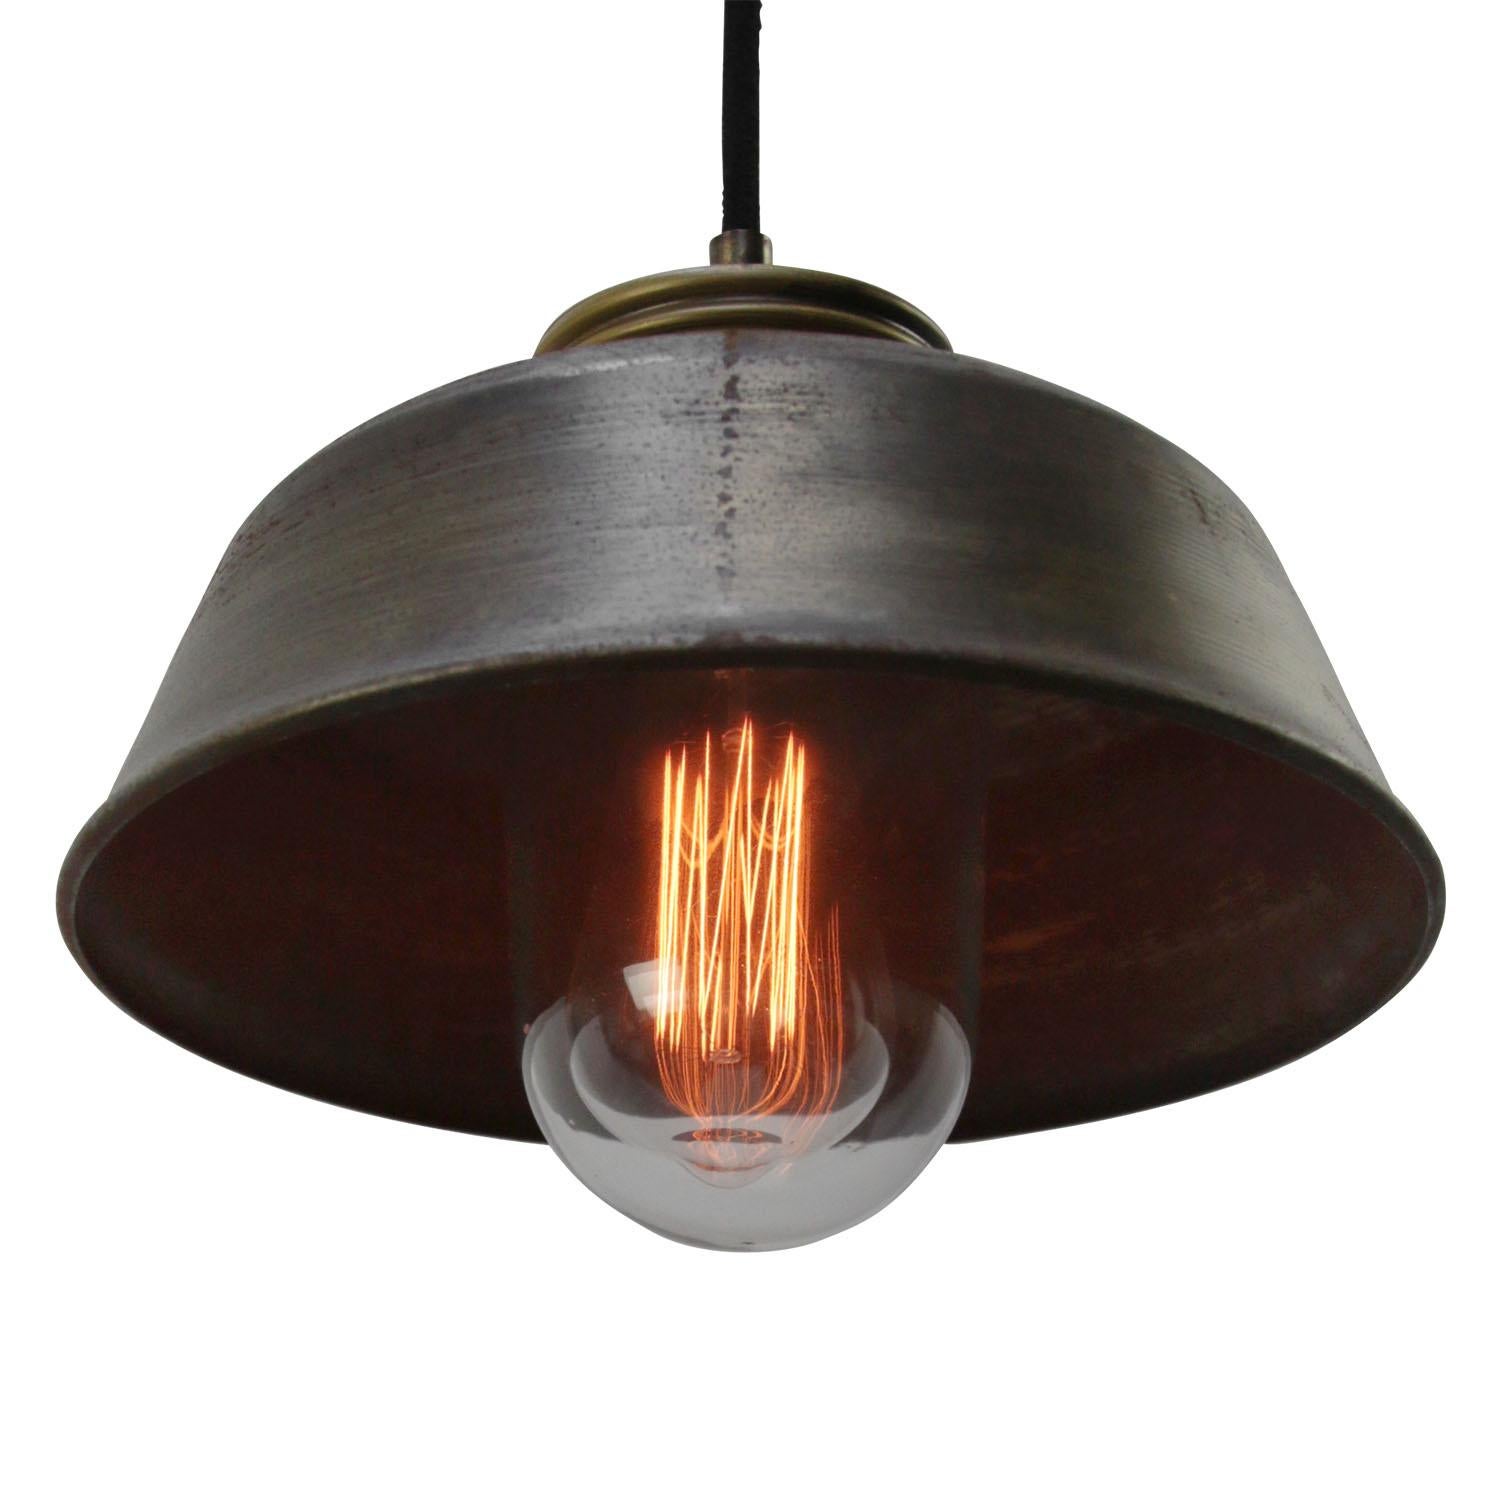 Vintage Industrial metal hanging lamp.
Clear glass with brass top.
metal shade

Weight 1.30 kg / 2.9 lb

Priced per individual item. All lamps have been made suitable by international standards for incandescent light bulbs, energy-efficient